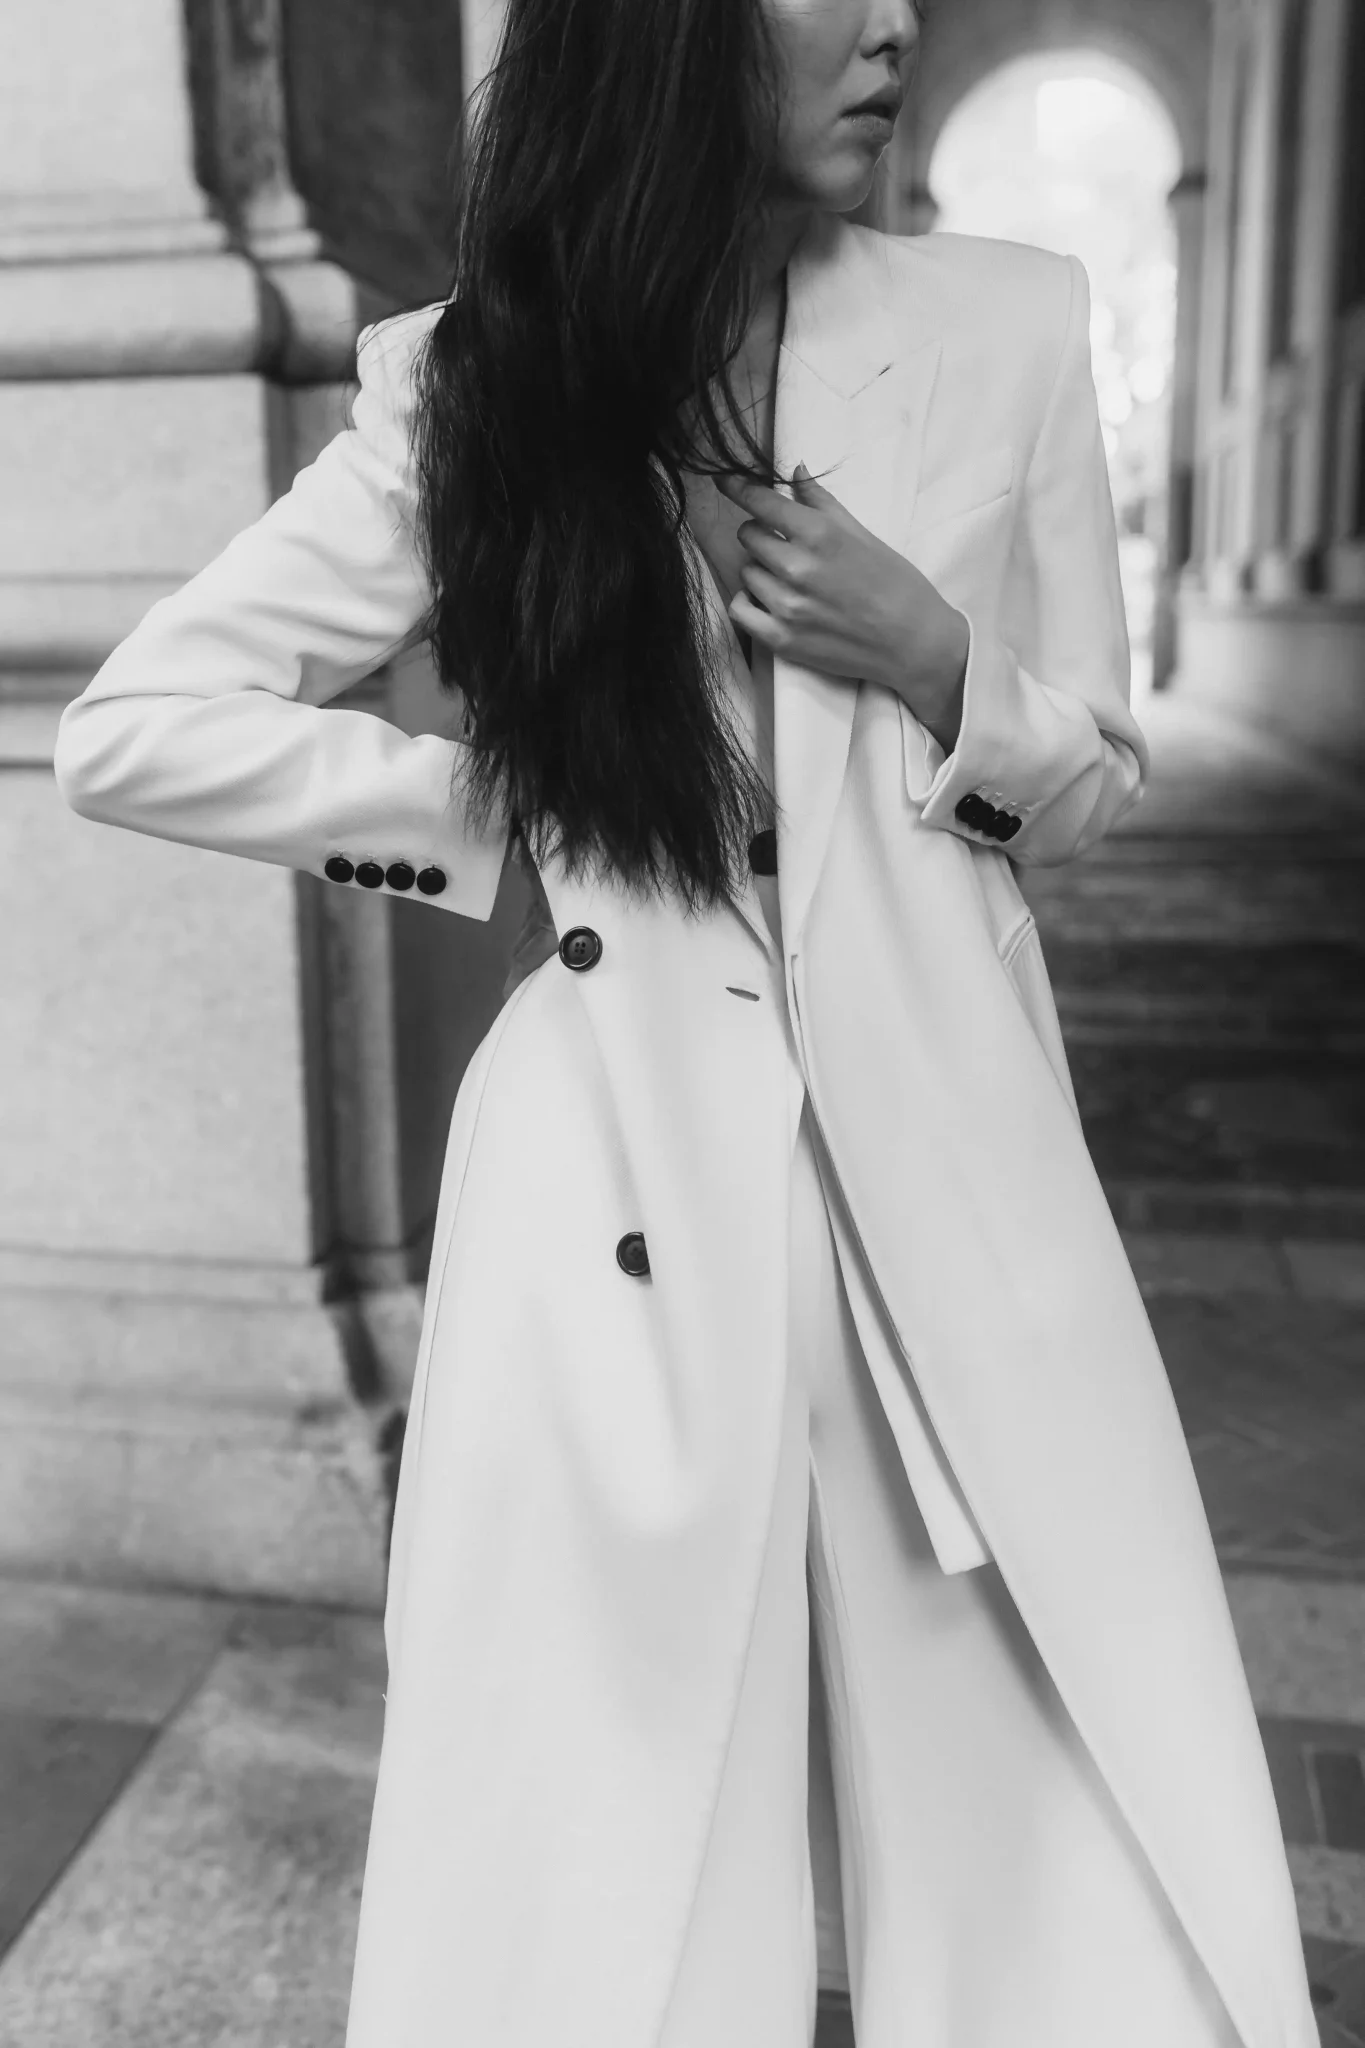 A woman in a white suit posing on a street.